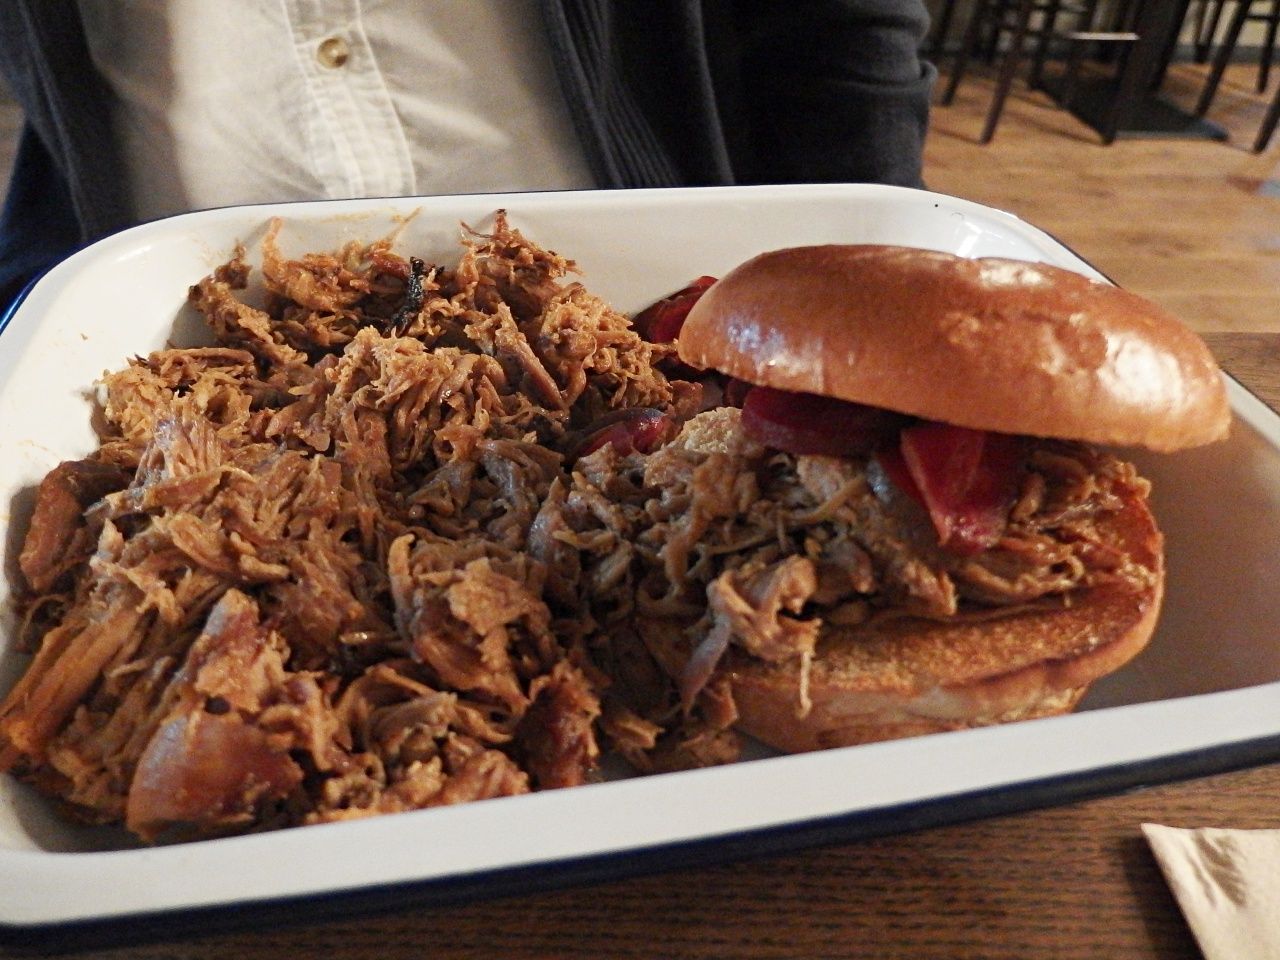 pulled pork and toasted bun at porky"s bbq